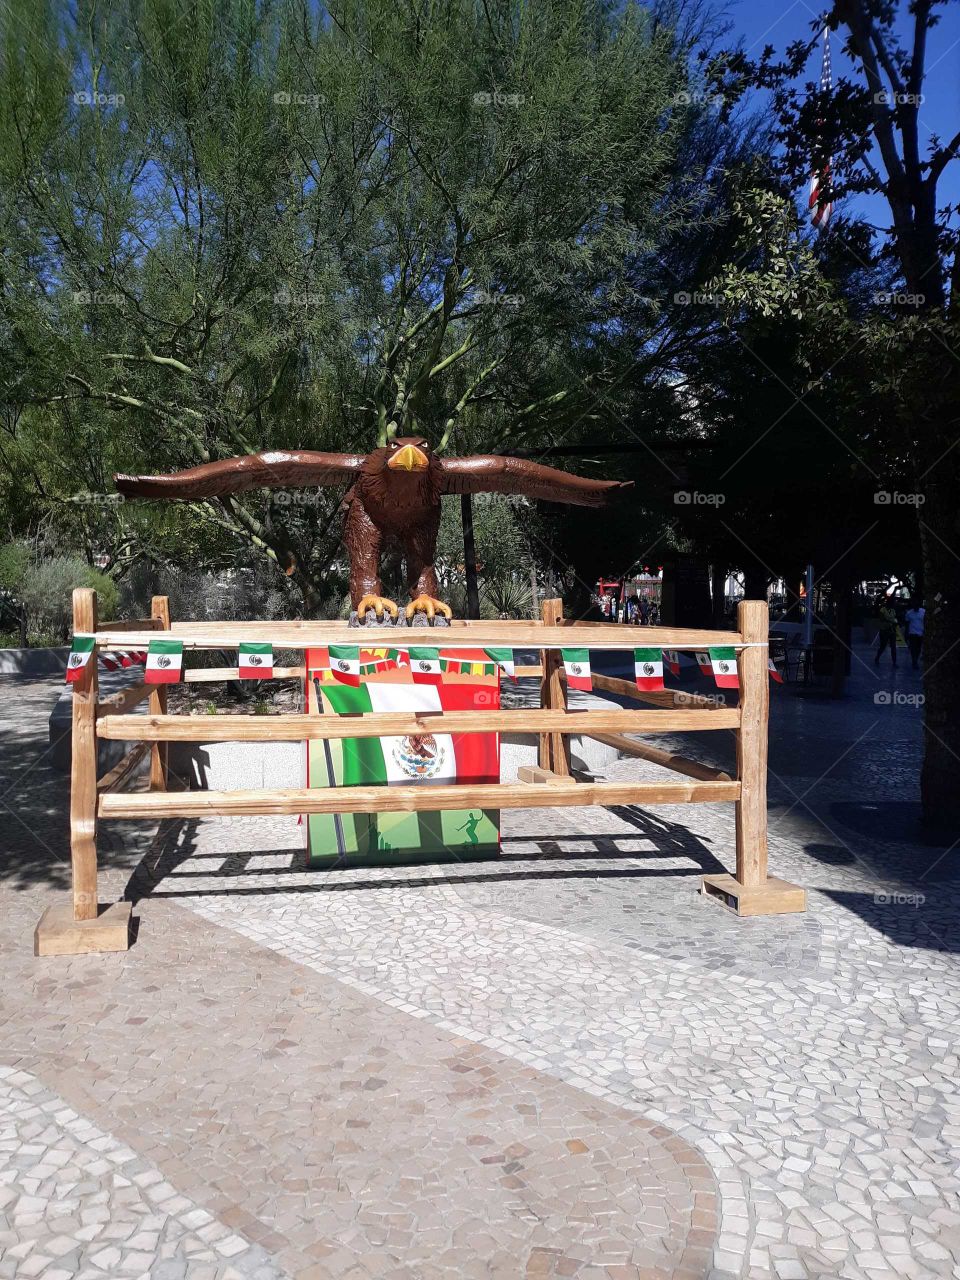 Eagle on display with Spanish decorations for Mexican Independence Day weekend